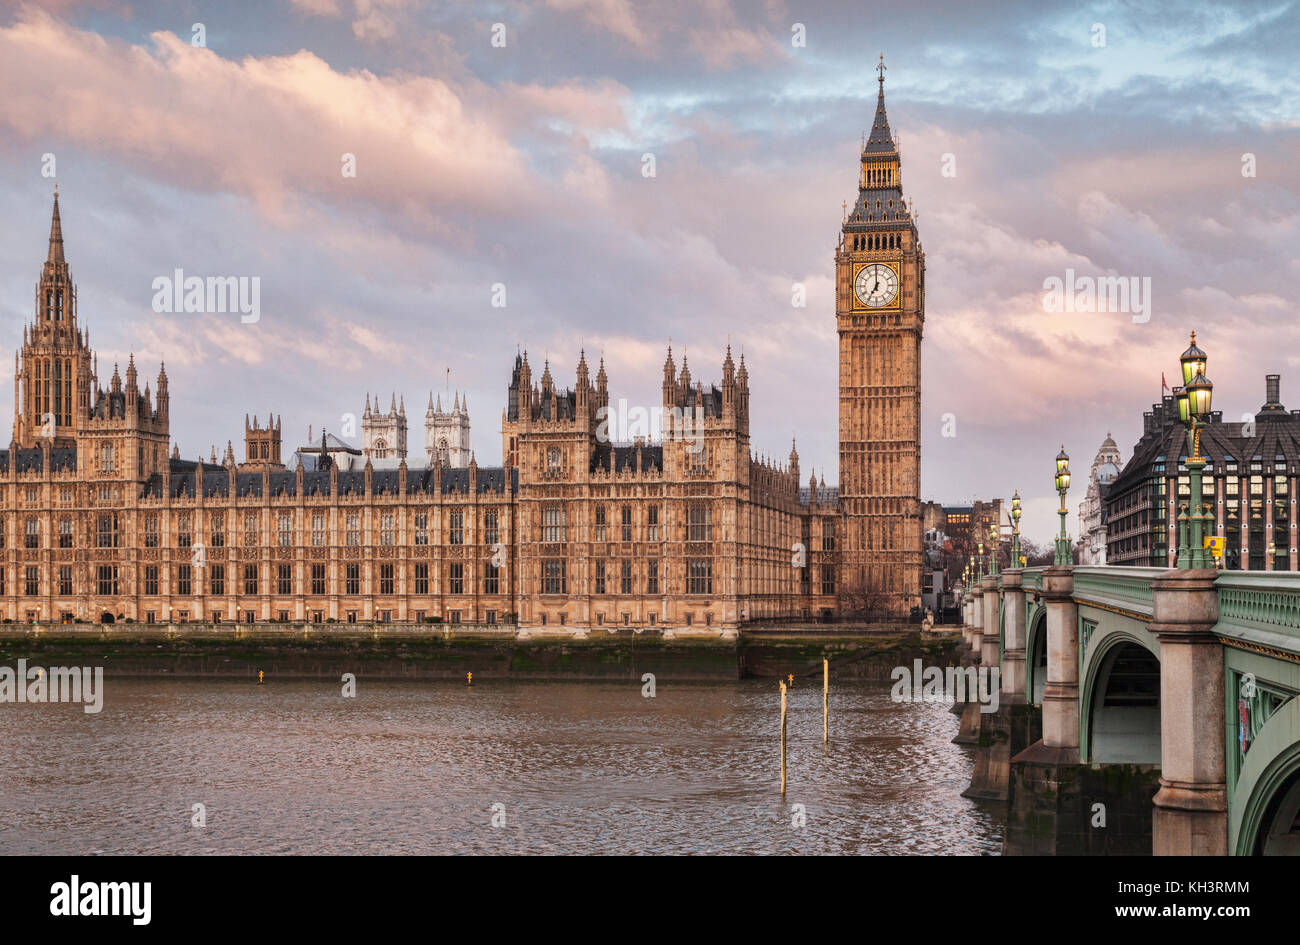 Big Ben and the Houses of Parliament on the banks of the River Thames, London. Stock Photo